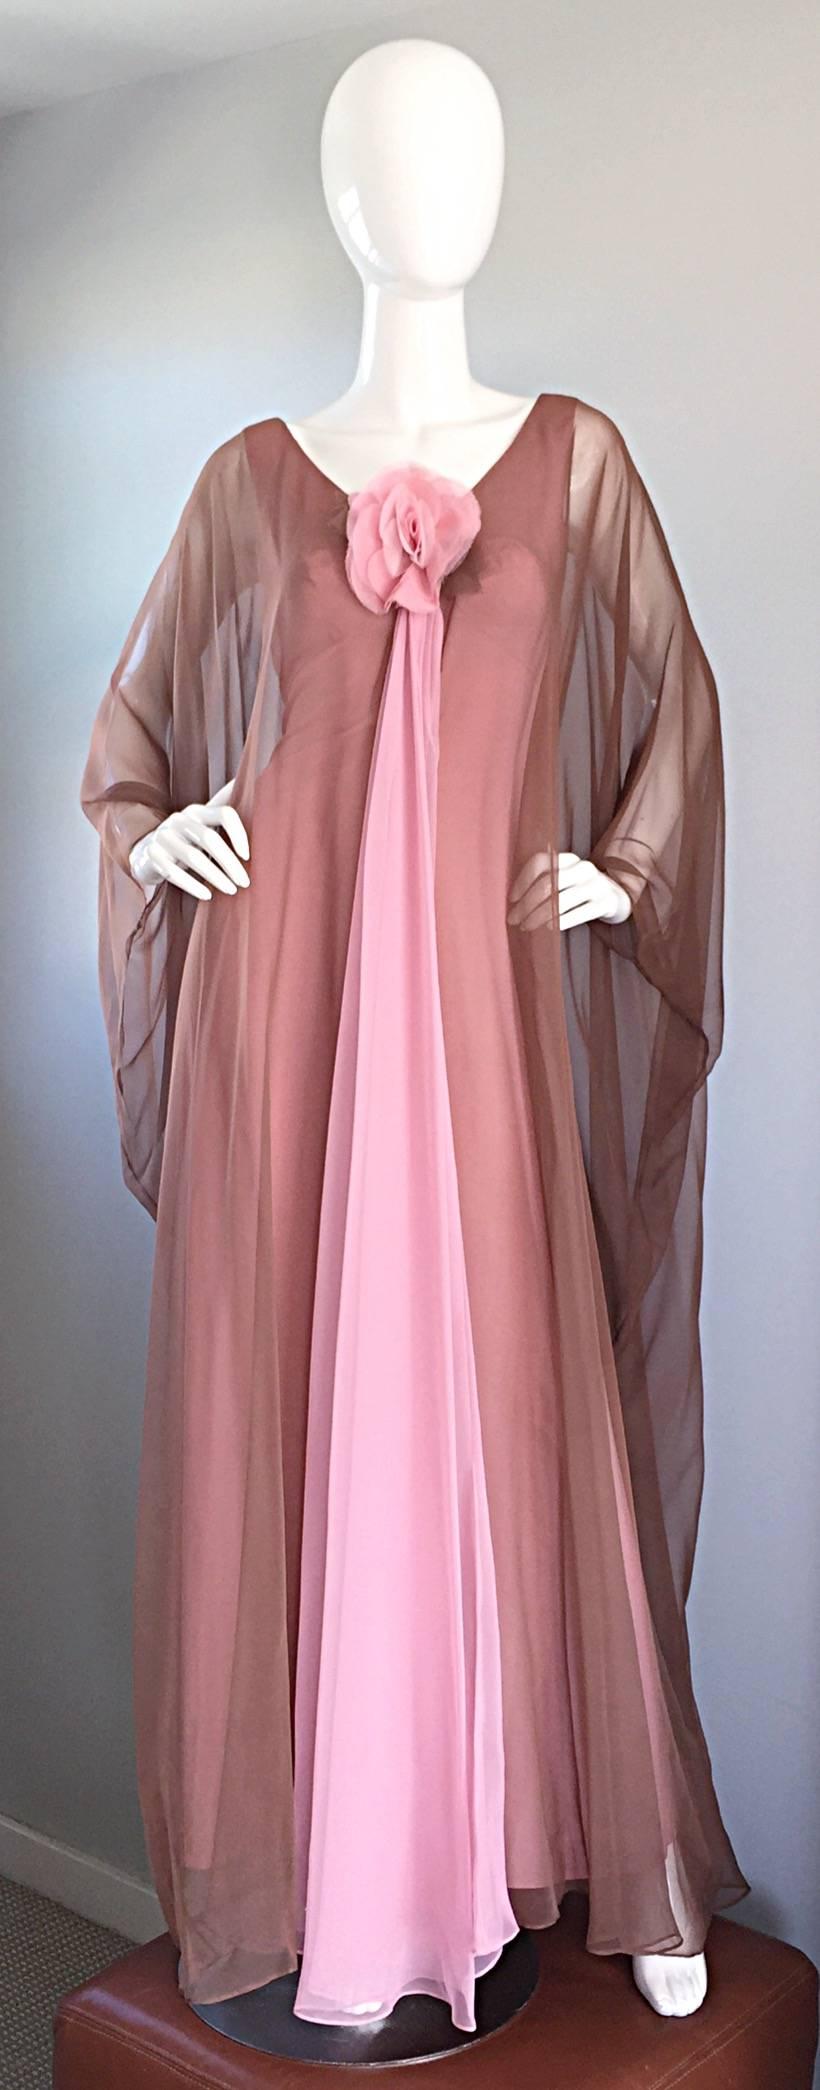 Incredible vintage ESTEVEZ pink and light brown chiffon caftan / kaftan maxi dress! Vibrant pink with an attached light brown chiffon caftan attached. The mixture of the pink and light brown form a glorious dusty rose color...STUNNING in person!